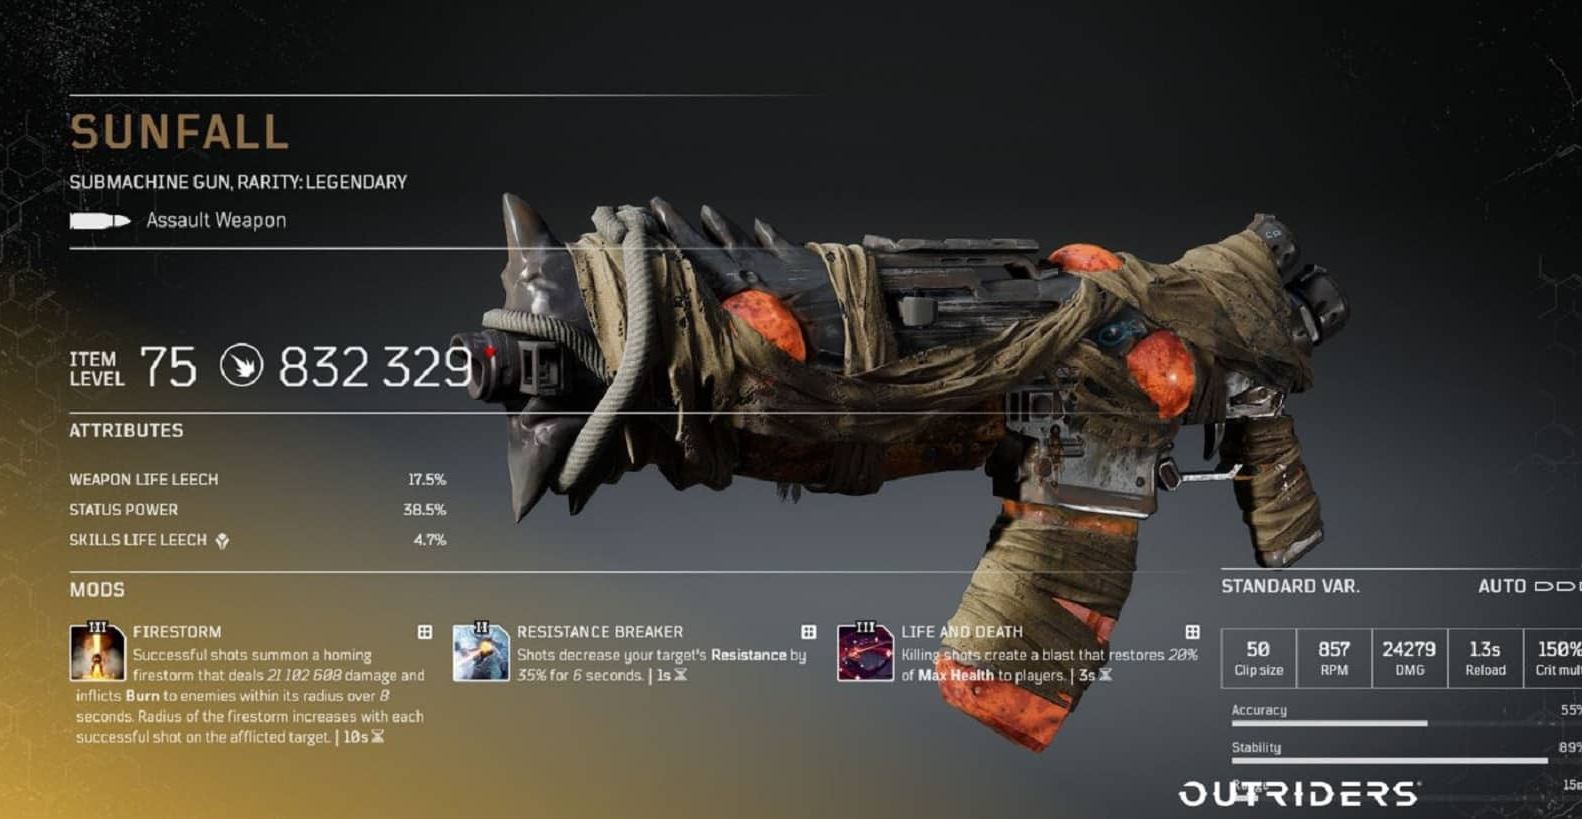 Outriders Worldslayer legendary SMG Sunfall